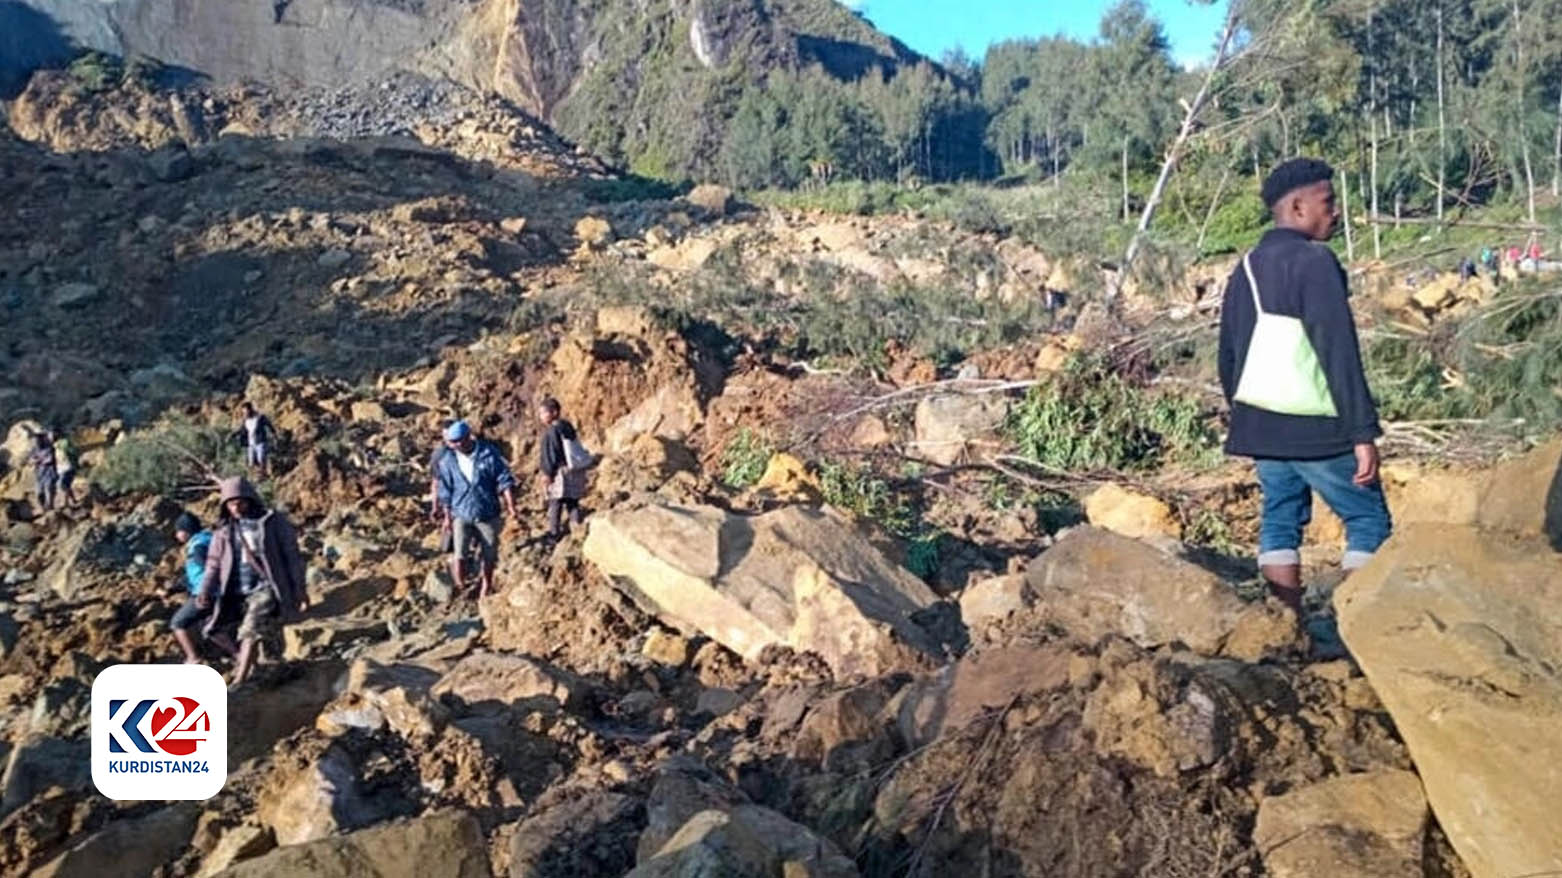 A view of the landslide in Papua New Guinea. (Photo: AFP)